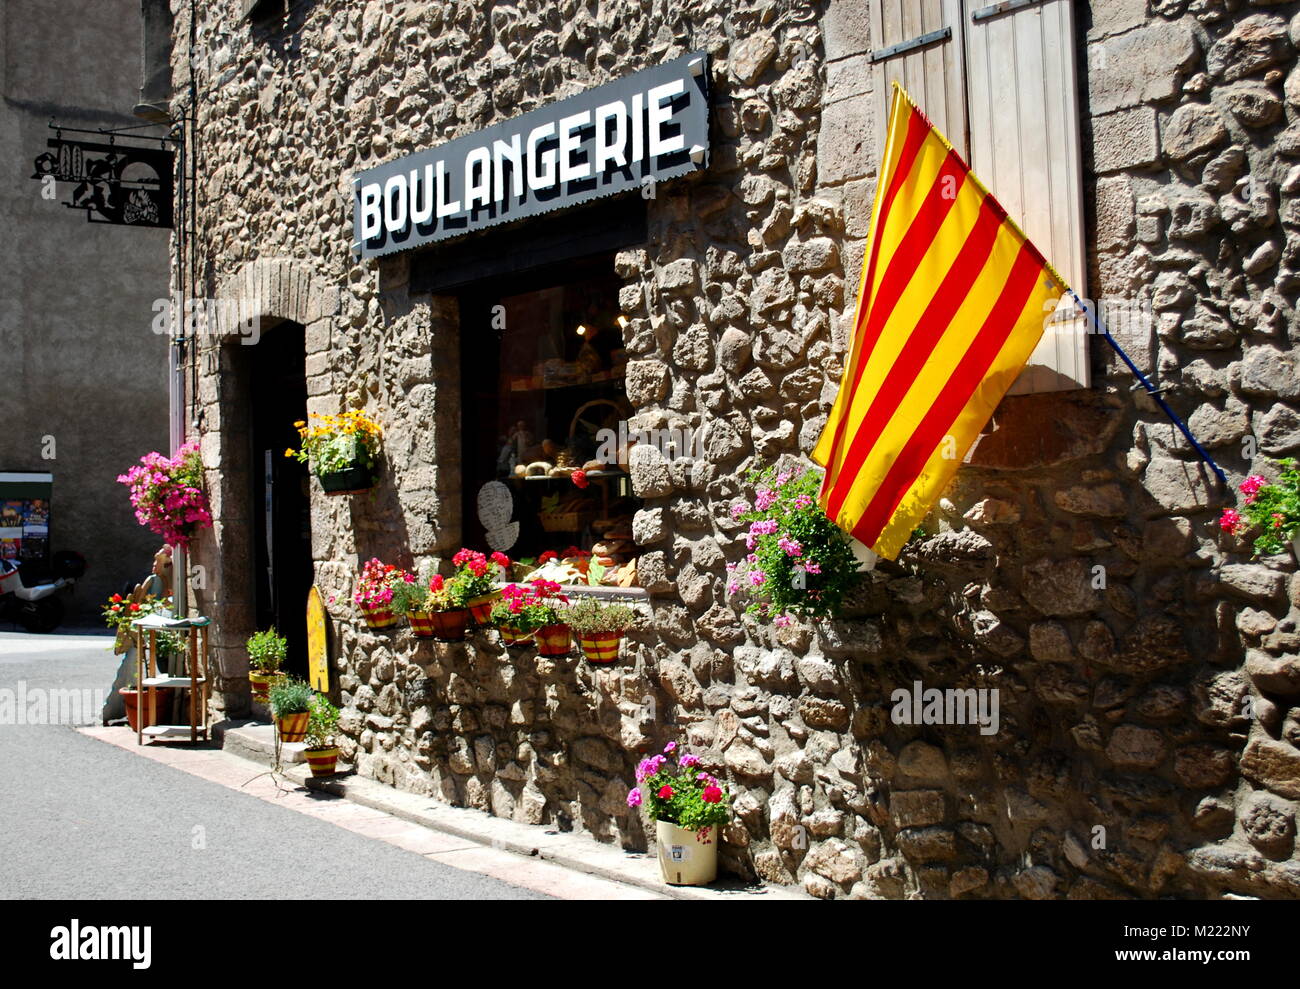 The Catalonian flag hangs outside a bakery on a pretty street in the pretty walled town of Villfranche de Conflent in the south of France. This mediev Stock Photo